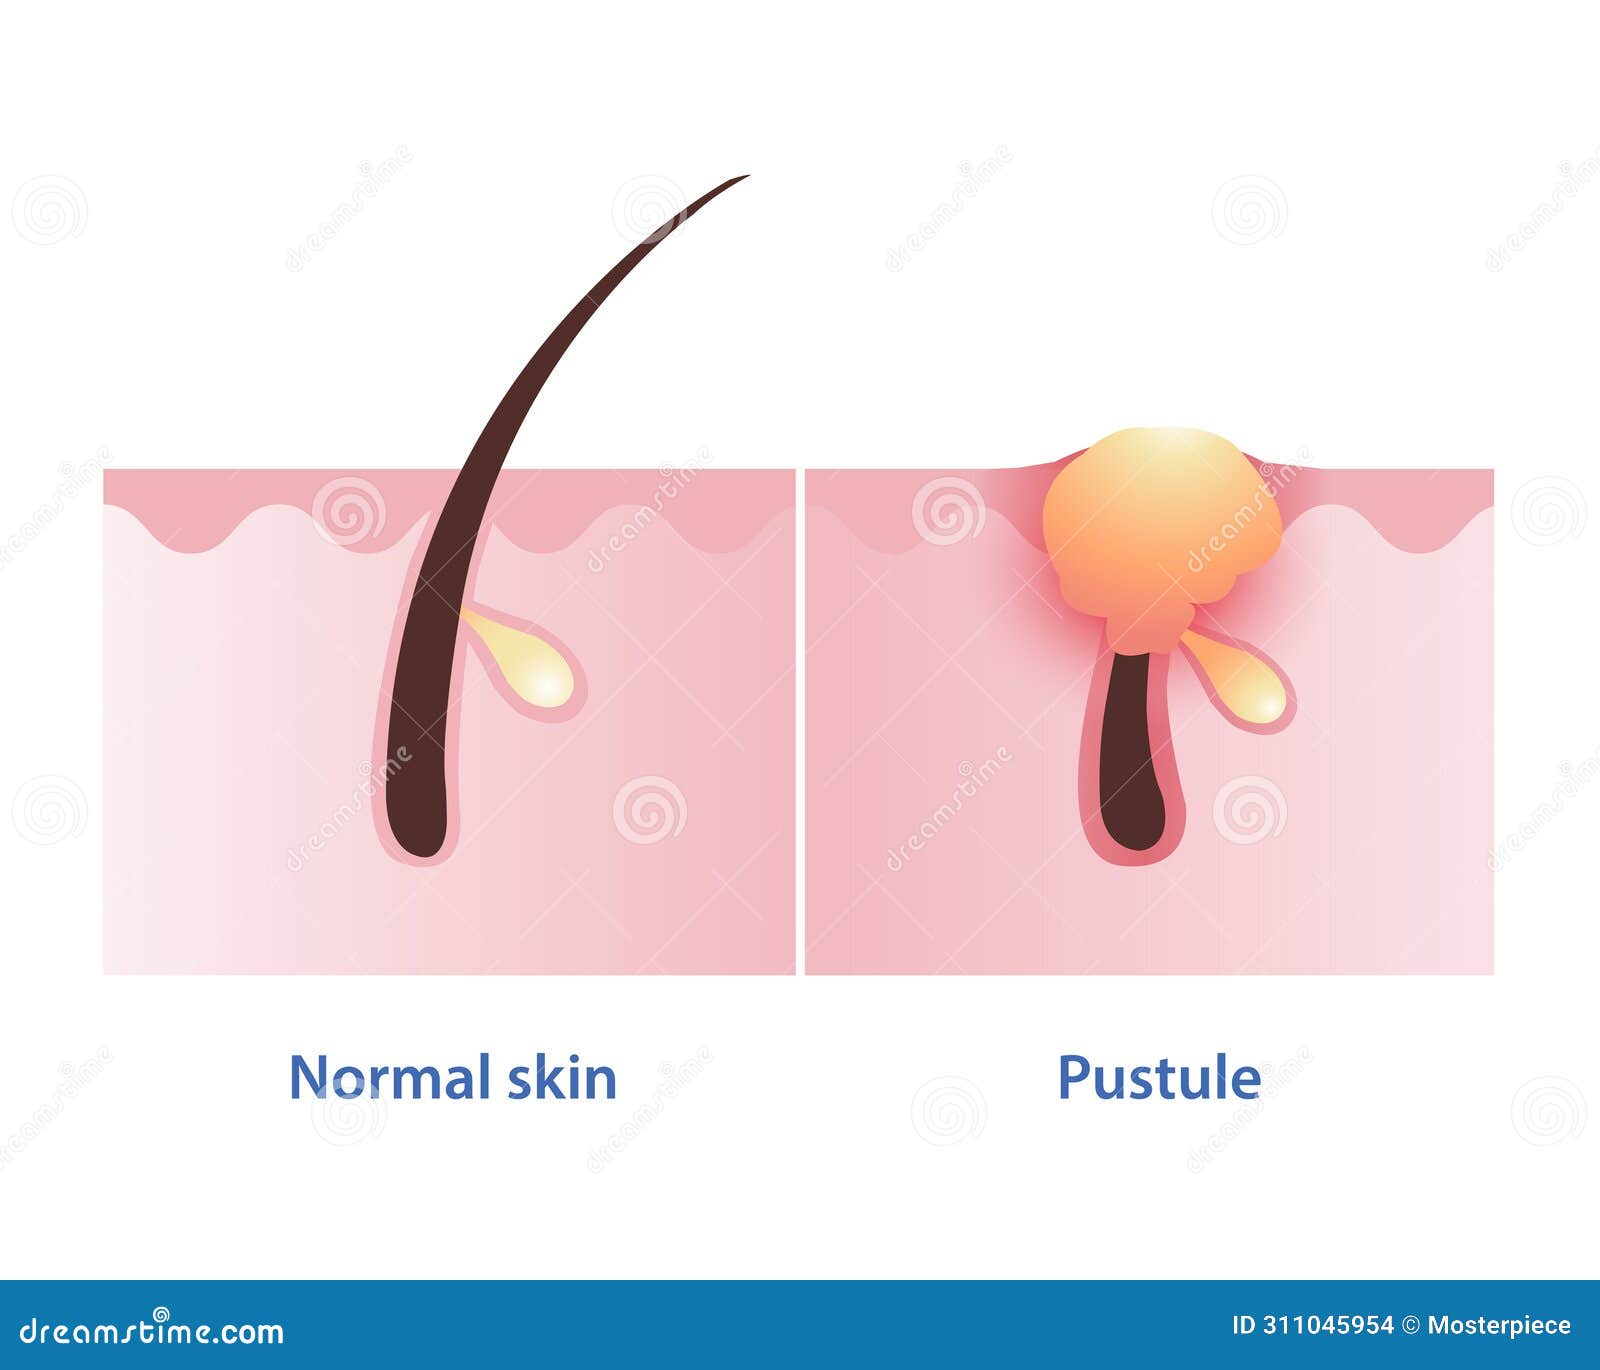 pustule, type of inflammatory acne develop from papule  on white background.